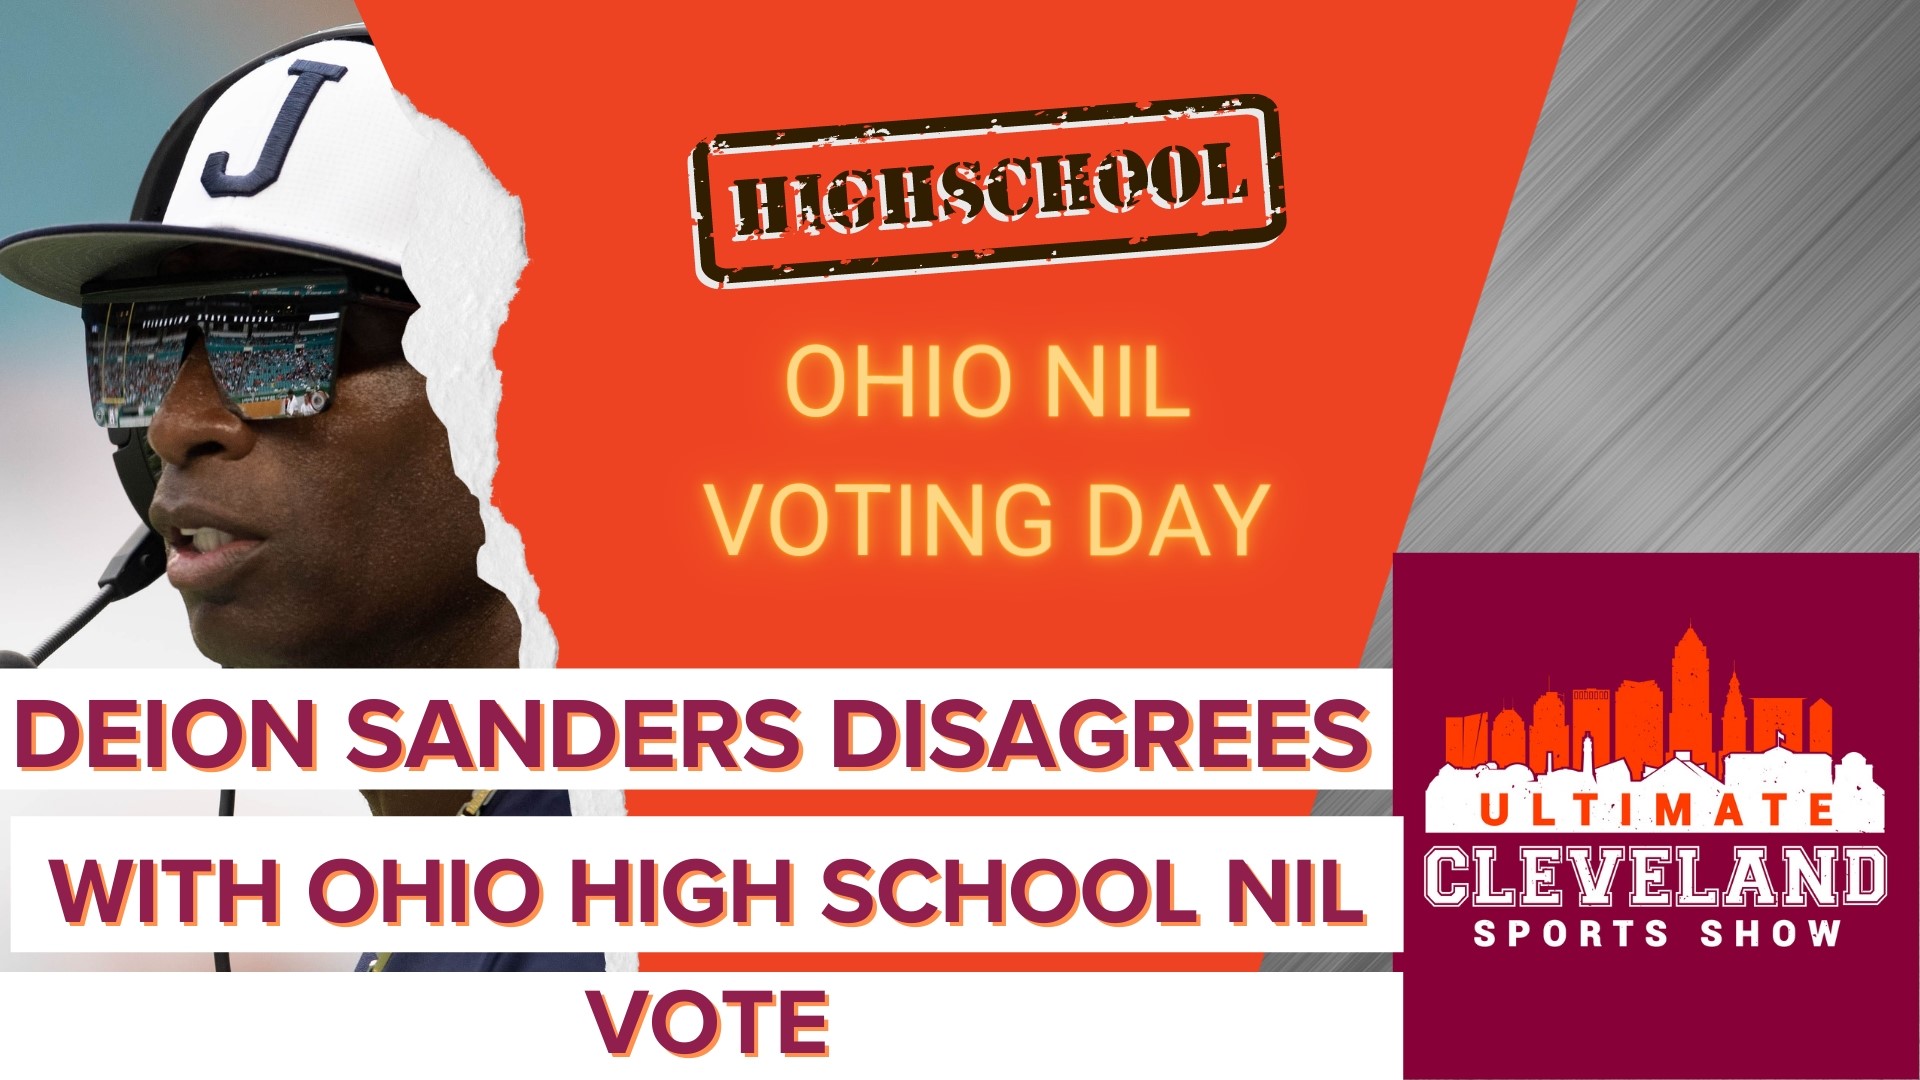 Ohio NIL voting day ends today at 4 pm, if passed it goes into effect tomorrow and athletes can start making money. Is this beneficial to the athlete or not?